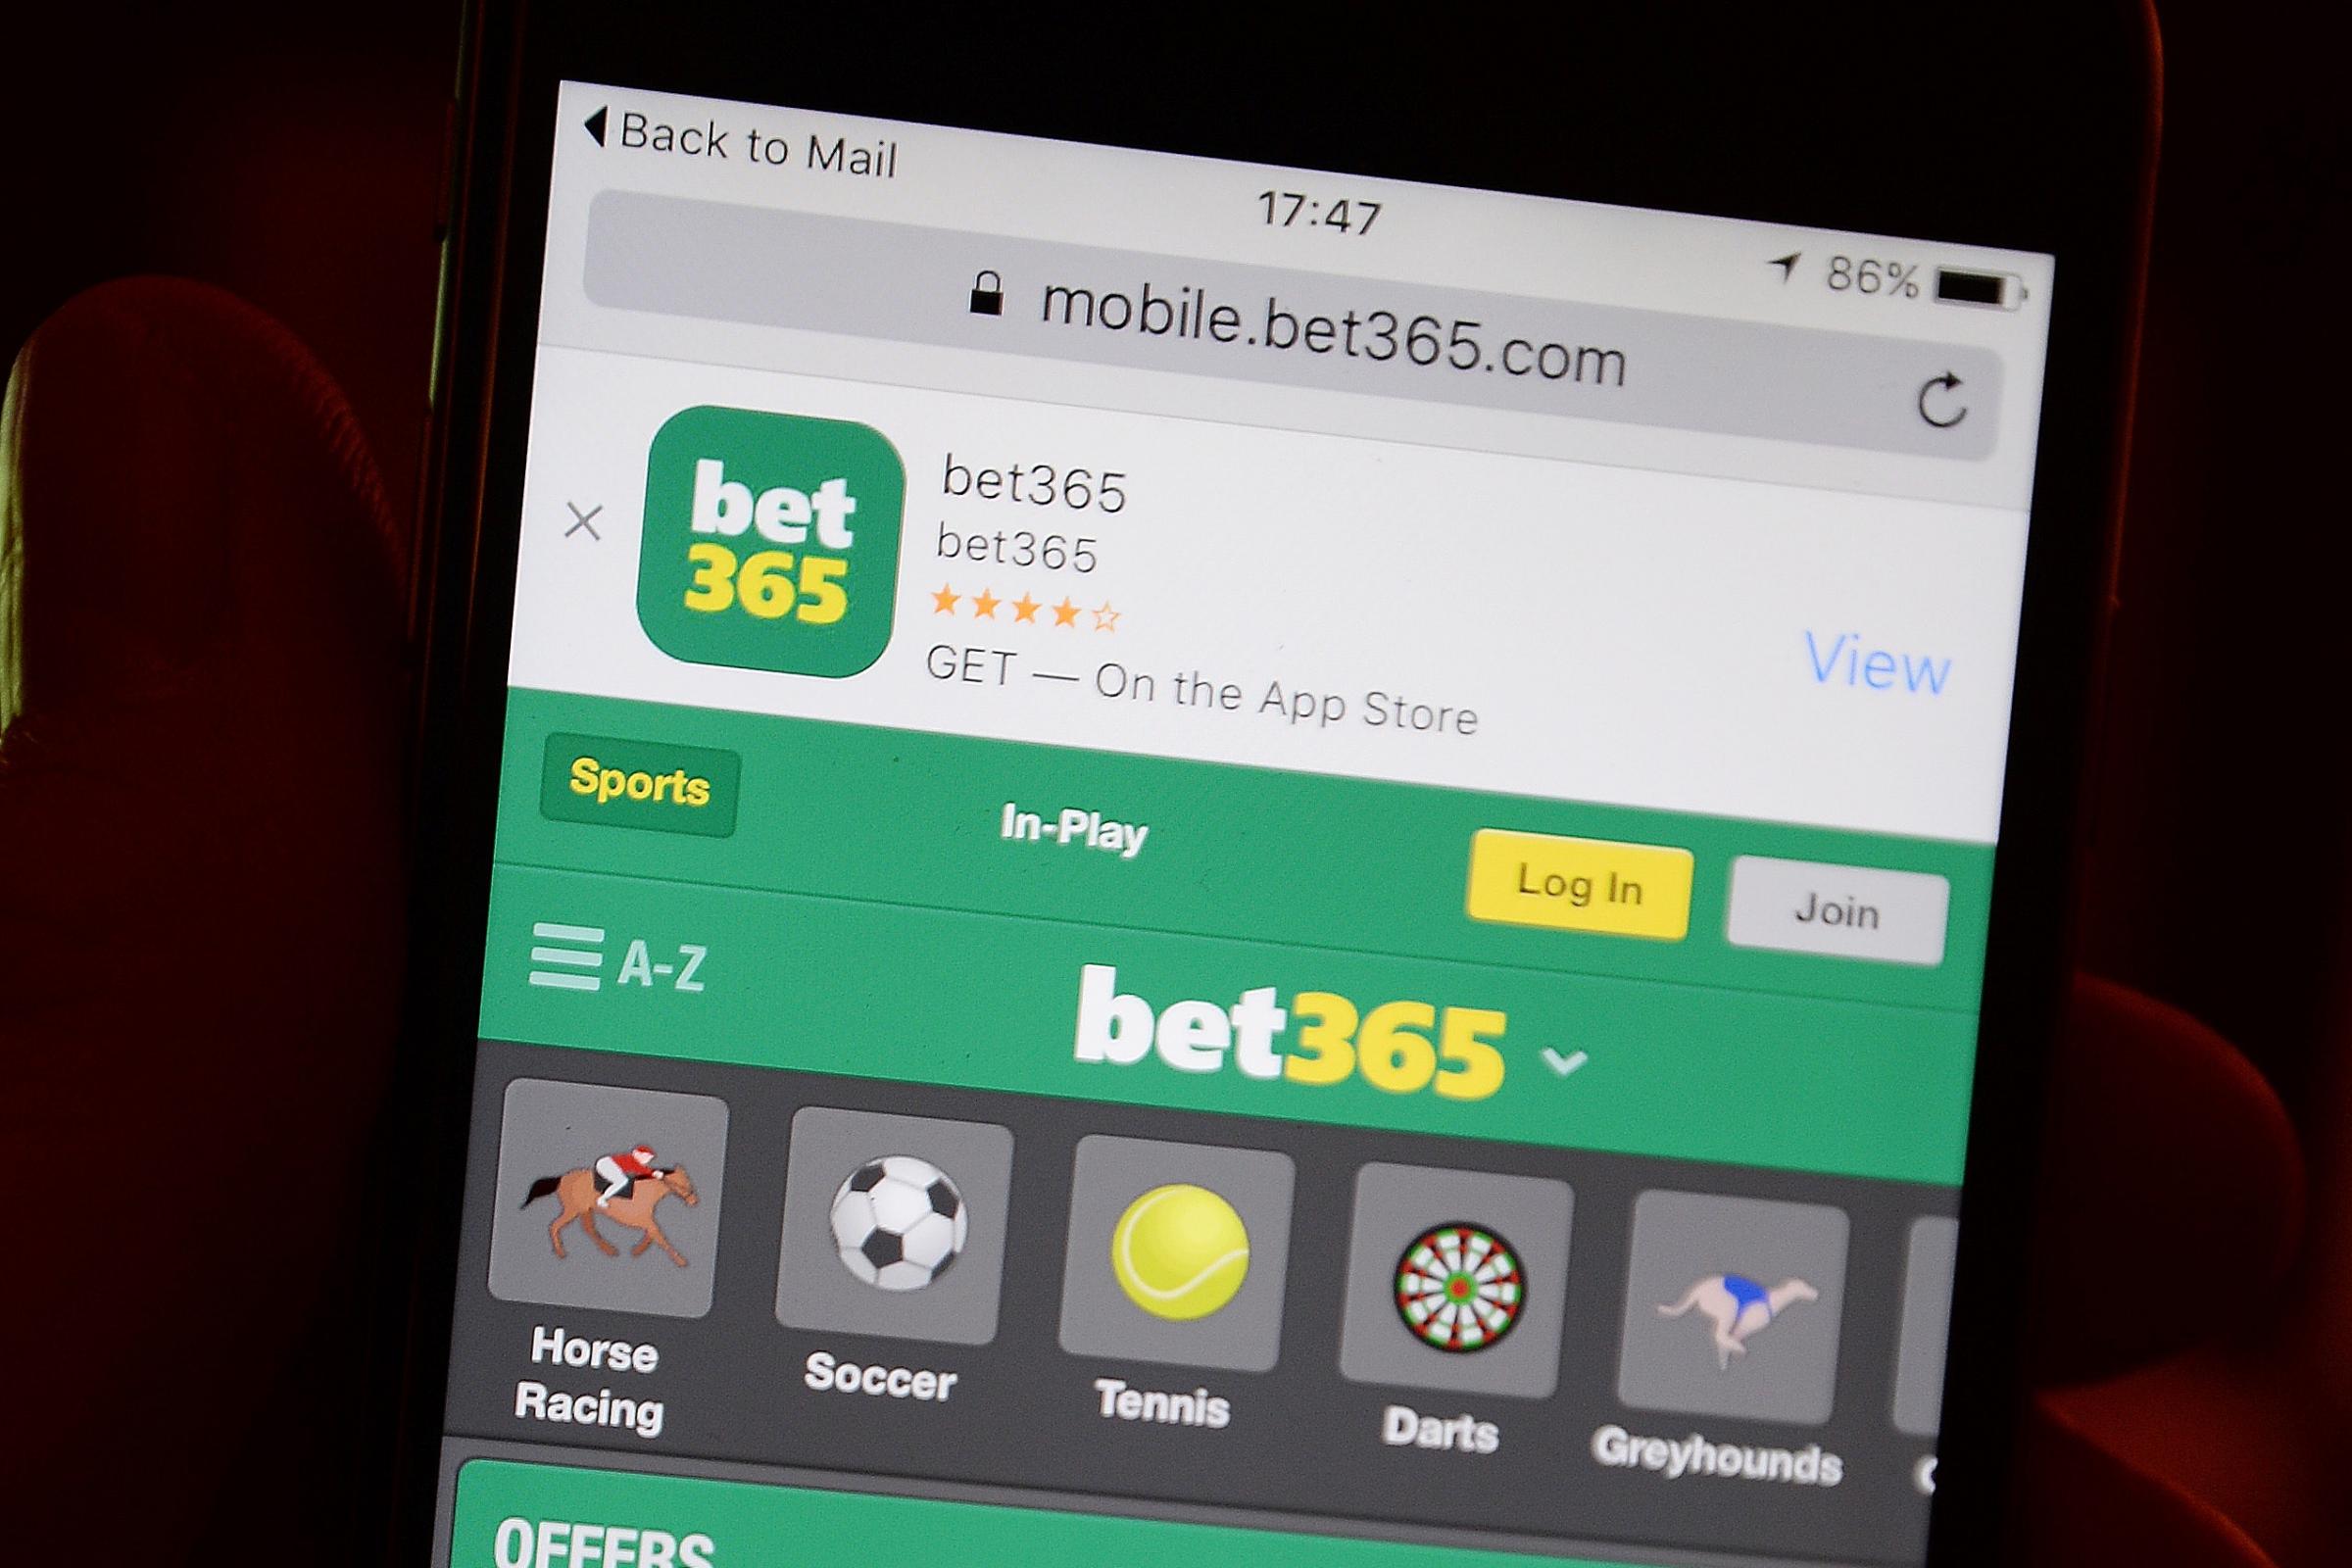 Hard Rock and Bet365 plan sports betting in New Jersey | East ...